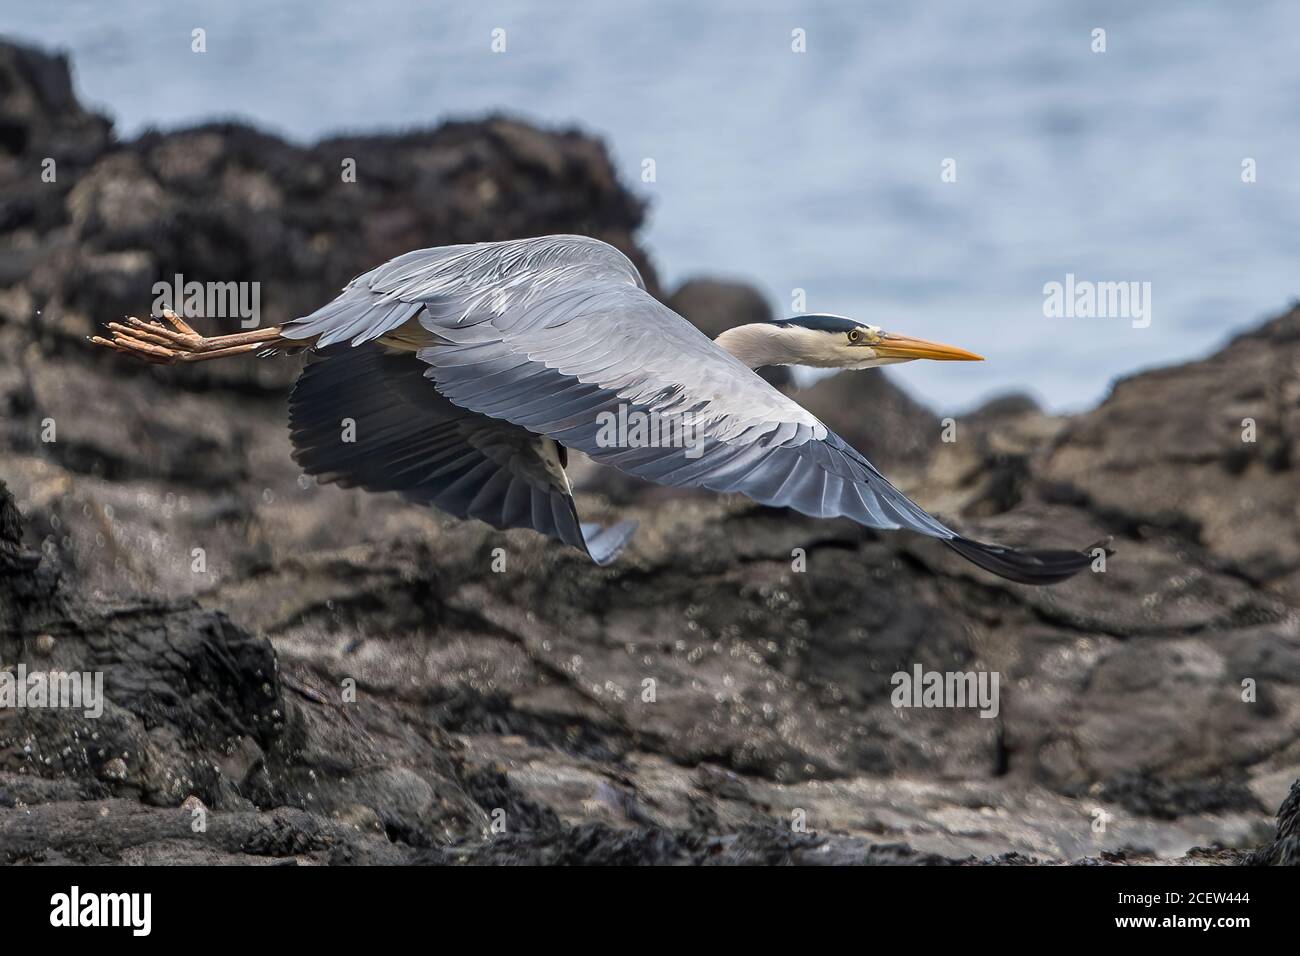 Heron on a mission to catch some fish on a beach in Scotland Stock Photo